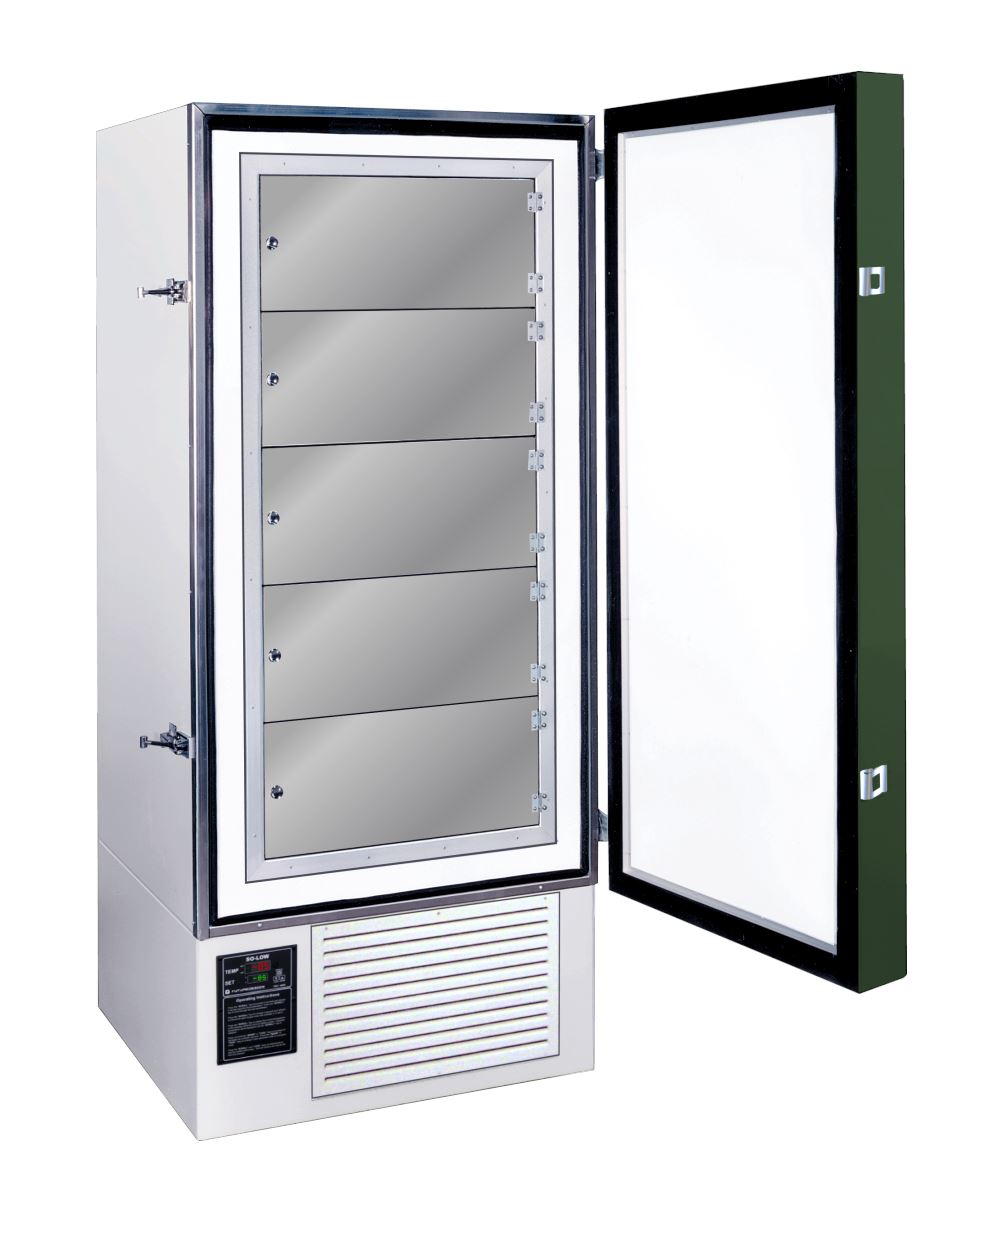 So-Low, So-Low -85°C Ultra-Low Upright Freezer - 13 Cubic Ft.